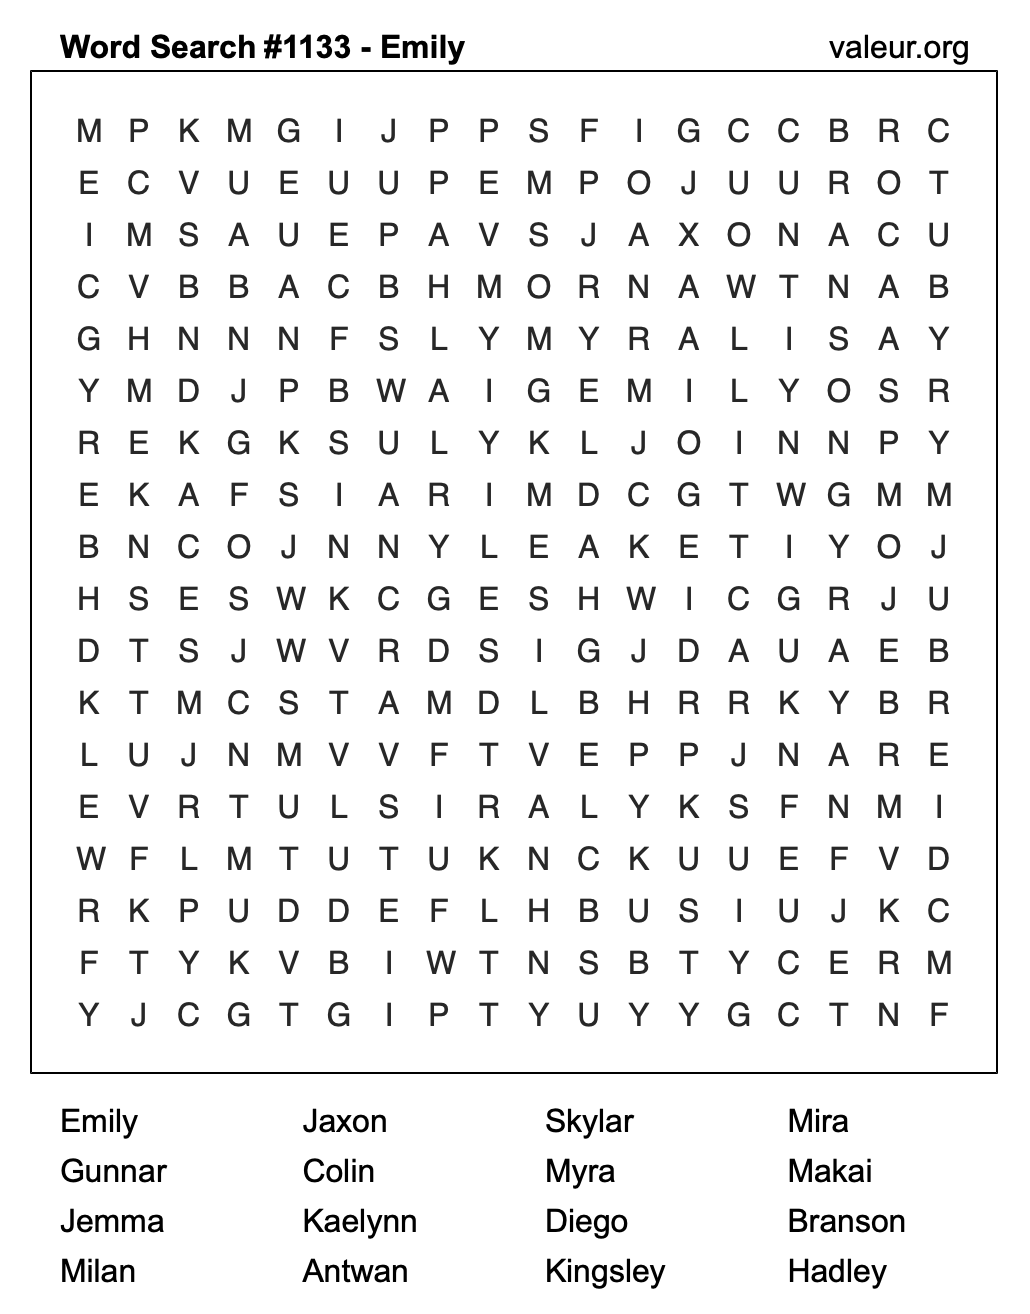 Word Search Puzzle with the name Emily #1133